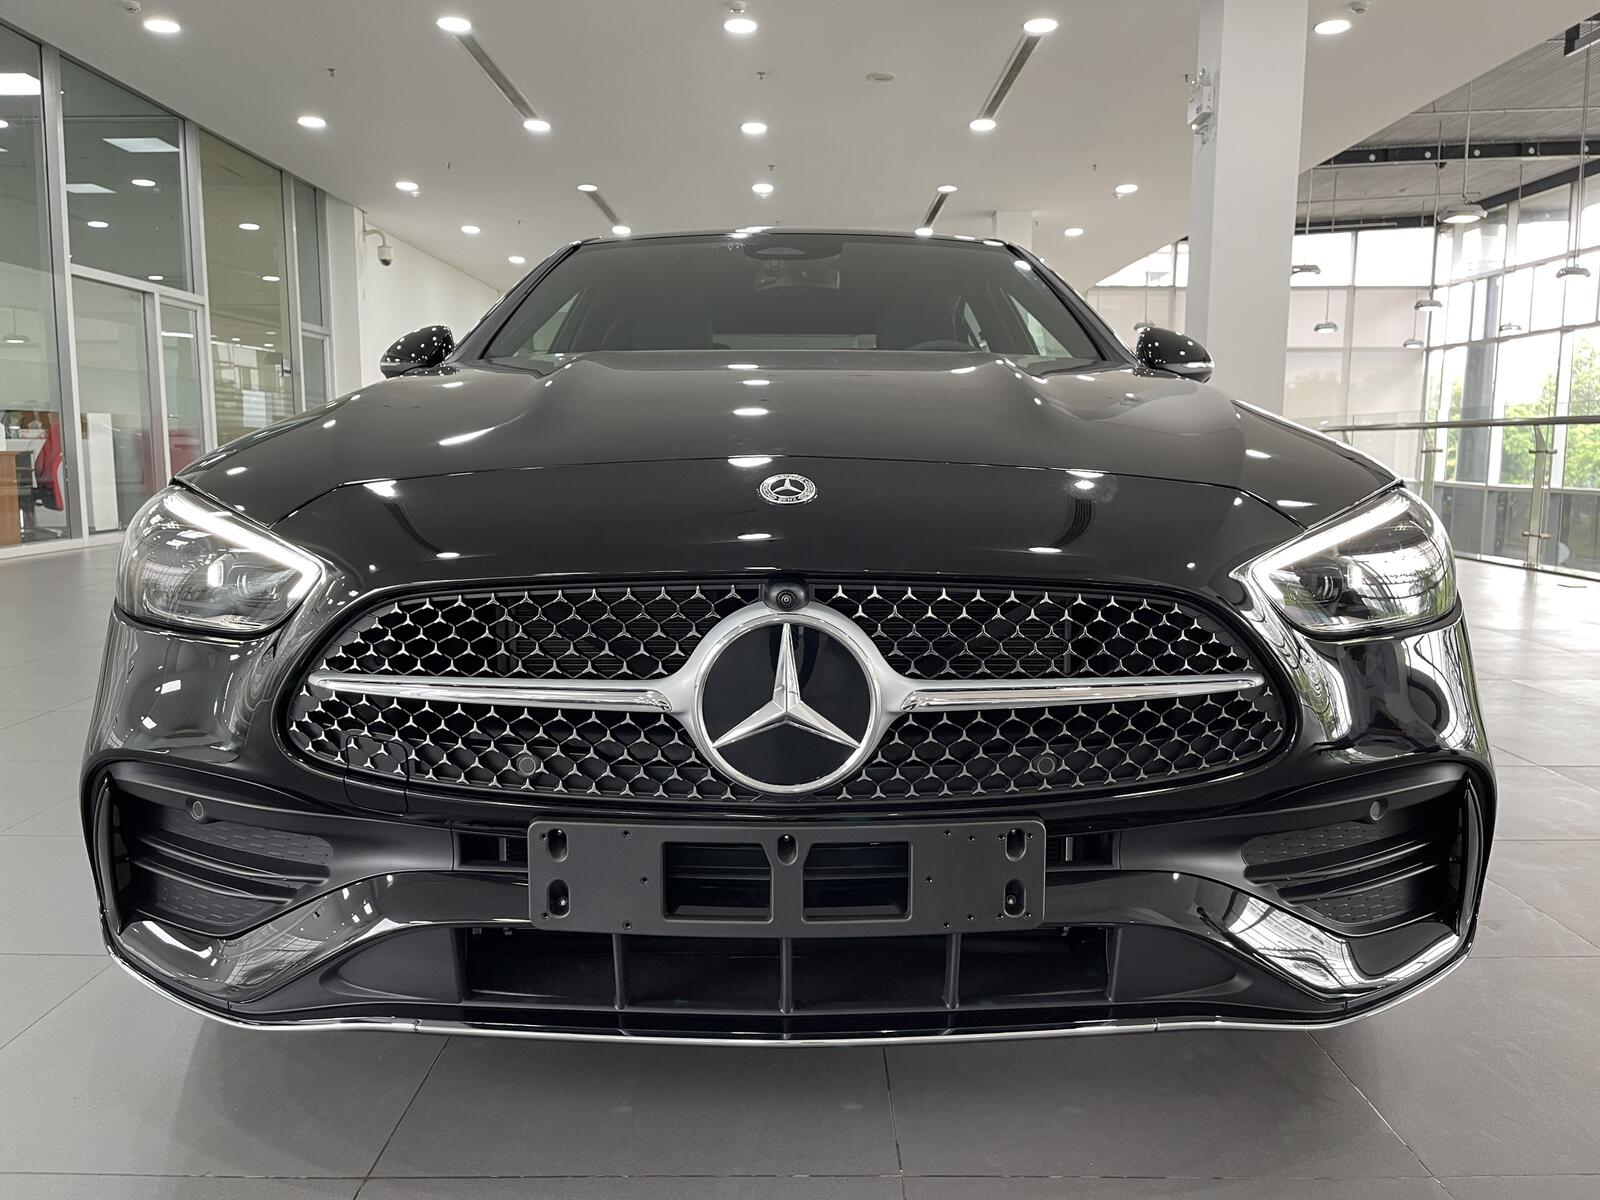 Mercedes-AMG C300 First Edition